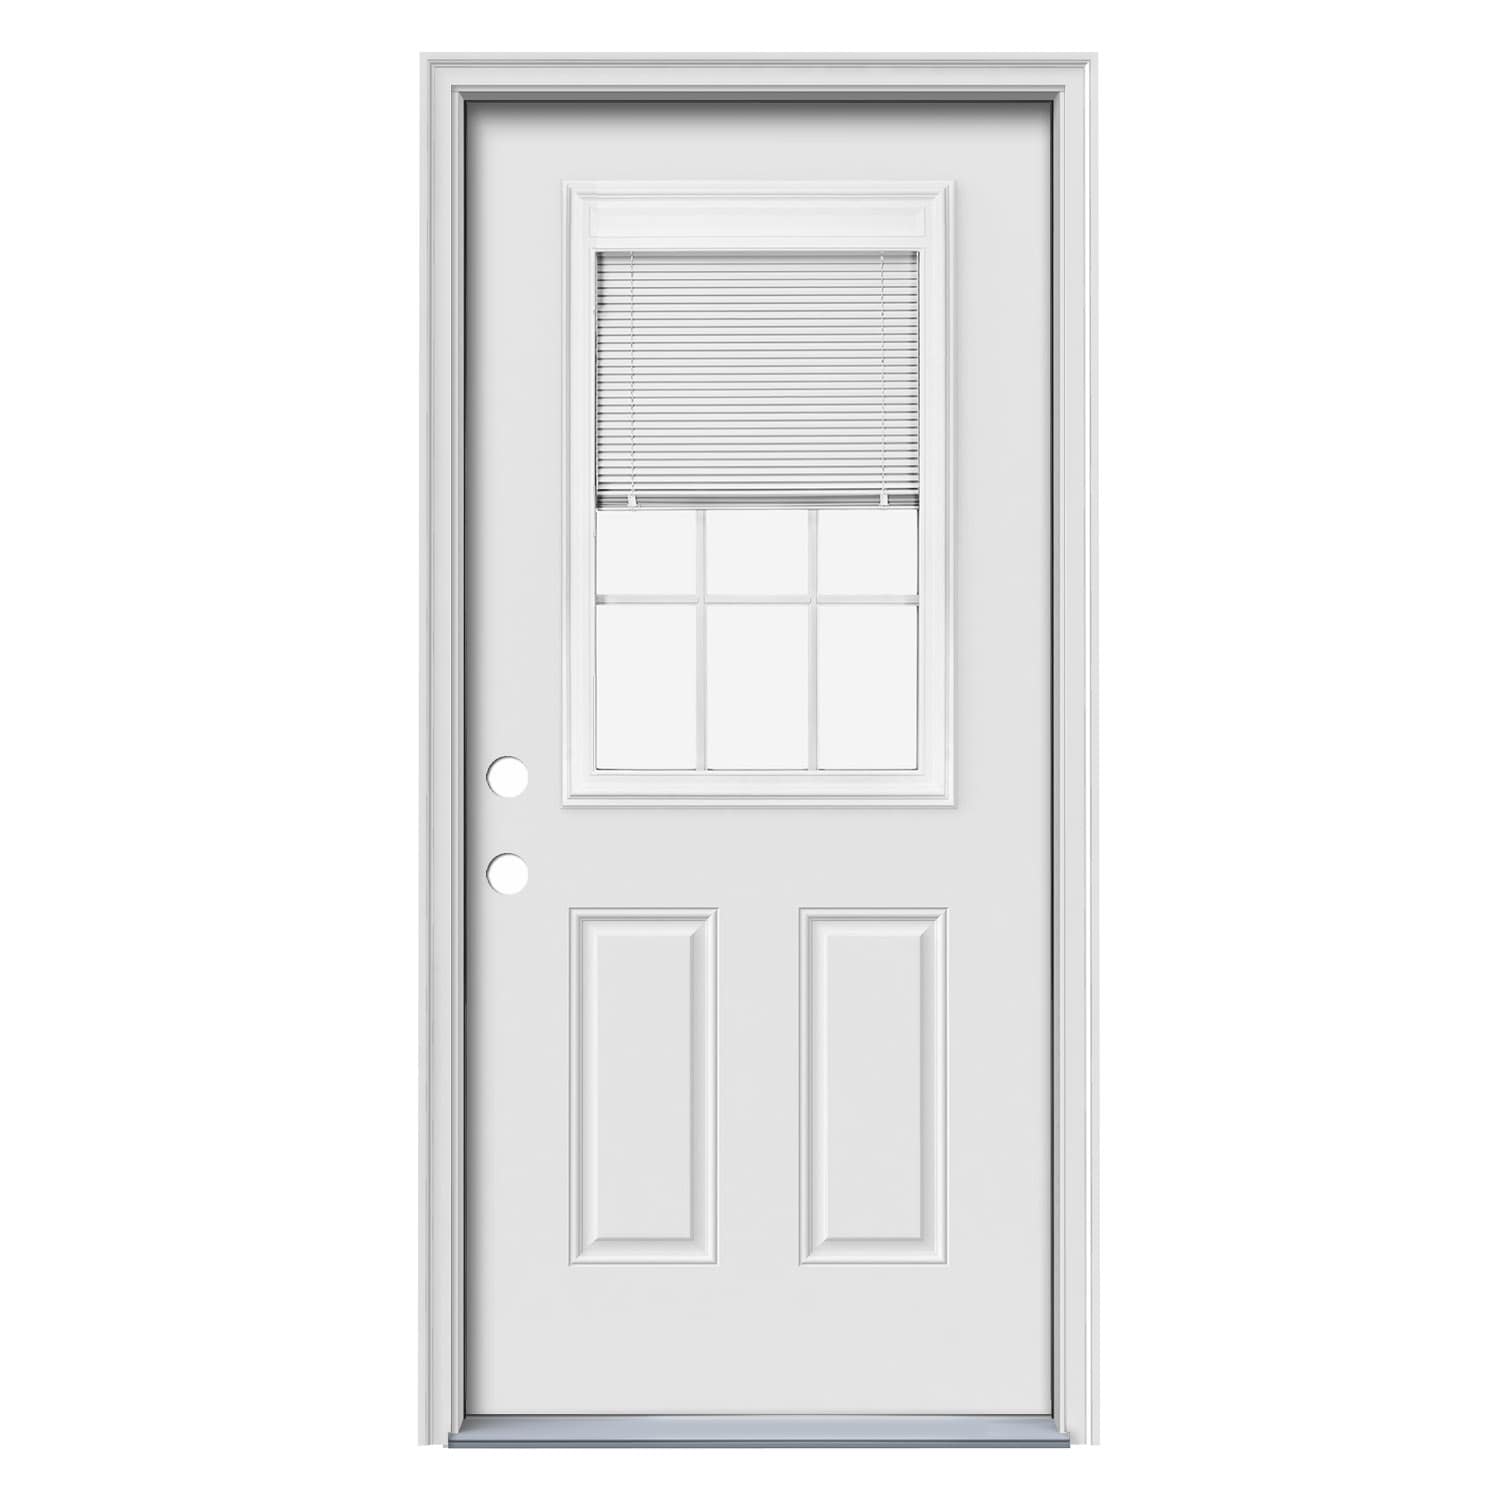 Therma-Tru Benchmark Doors 32-in x 80-in Steel Half Lite Right-Hand Inswing Ready To Paint Prehung Single Front Door with Brickmould Insulating Core -  10087723